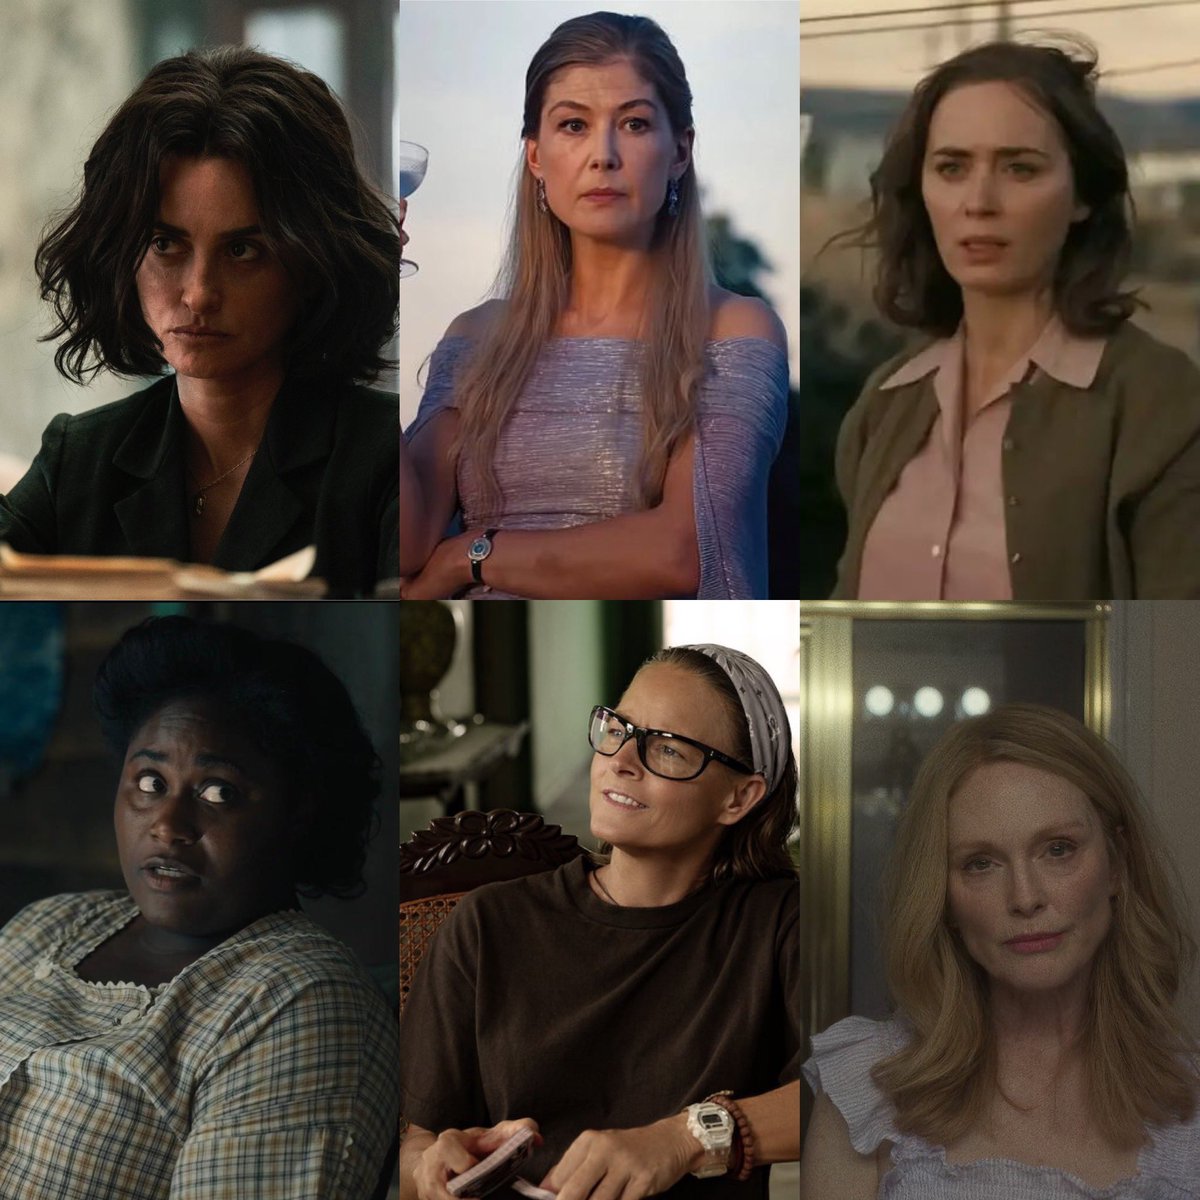 #BestSupportingActress Save Da’Vine’s spot, but i feel like four of the five spots are up for grabs. None are safe, even Emily and Danielle. They could miss too!

We could even have Sandra Huller for THE ZONE OF INTEREST on the final five. This is a hard category to predict.